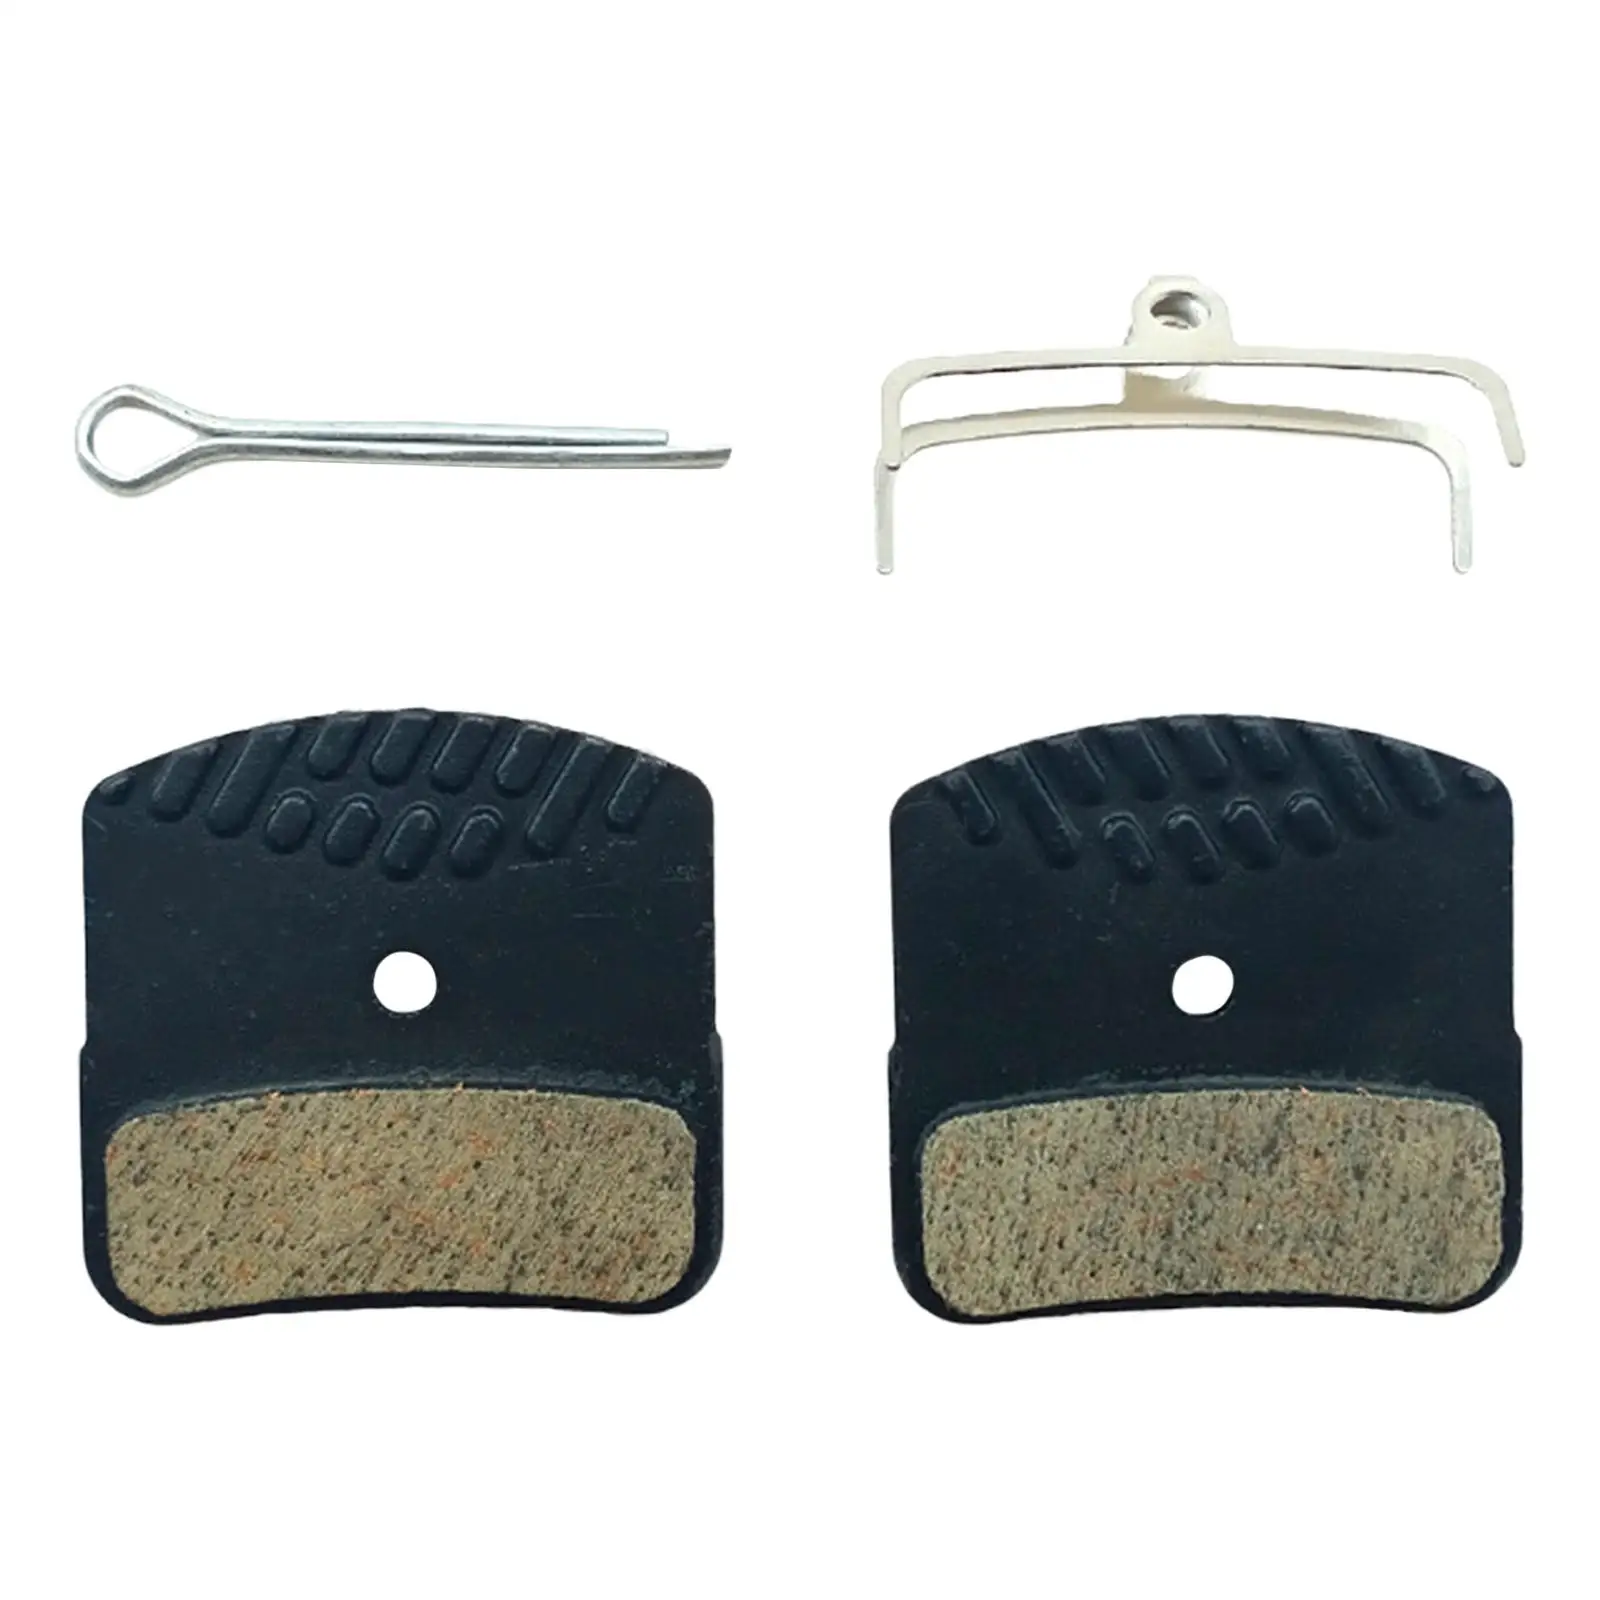 2 Pieces MTB Road Bike Disc Brake Pads Replacement Cooling Fin Bicycle Disc Brake Pad for M9120, M8120, M7120, M810, M640